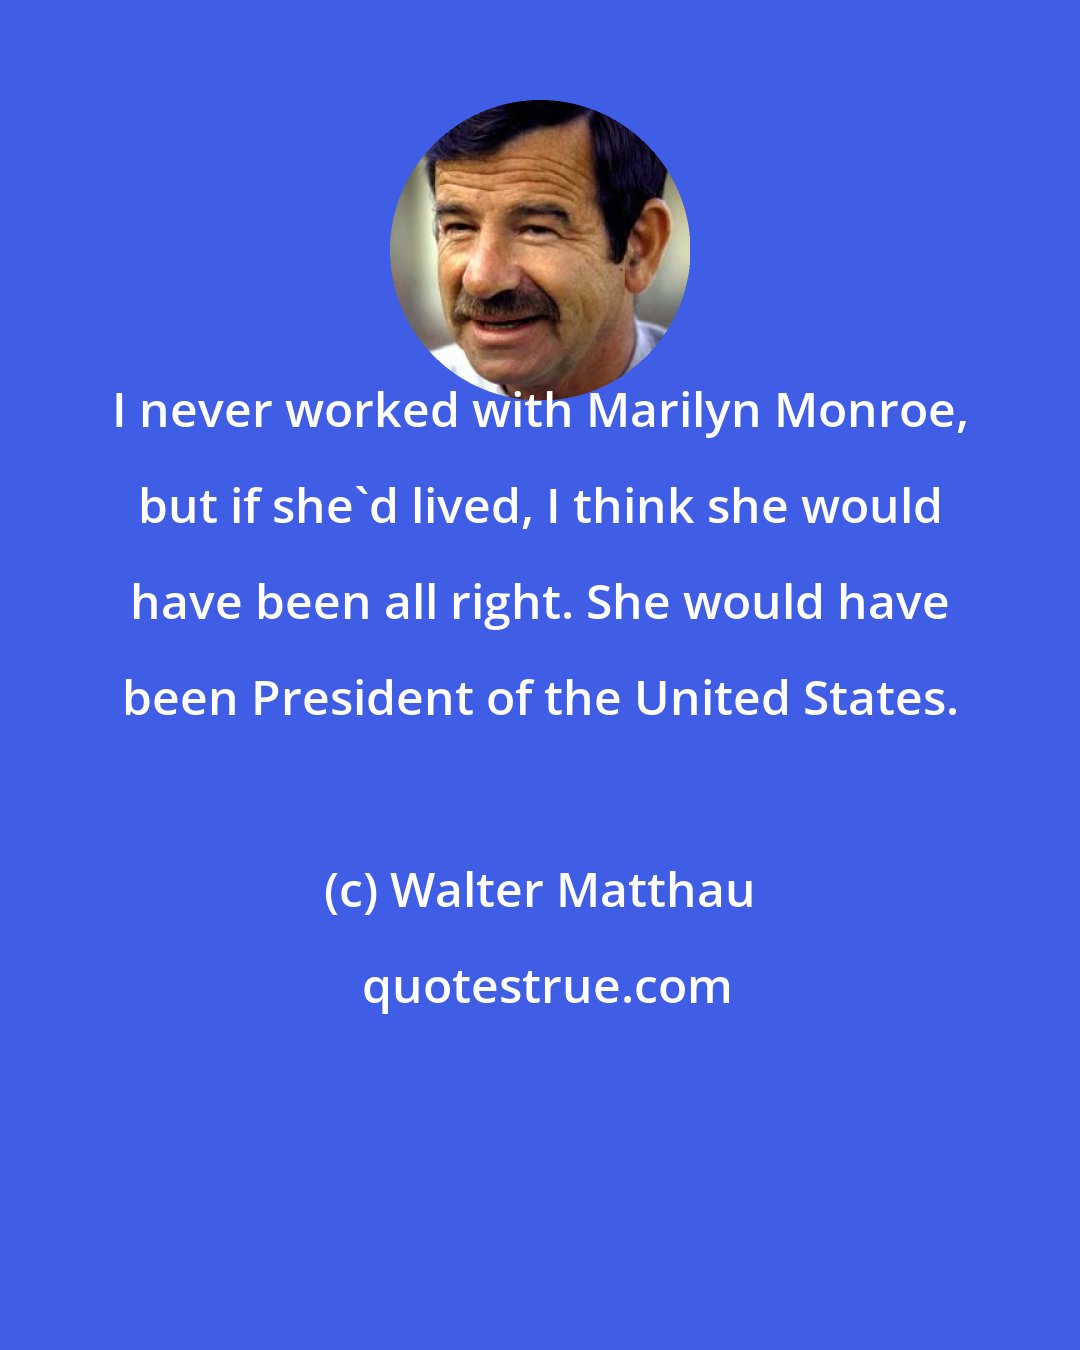 Walter Matthau: I never worked with Marilyn Monroe, but if she'd lived, I think she would have been all right. She would have been President of the United States.